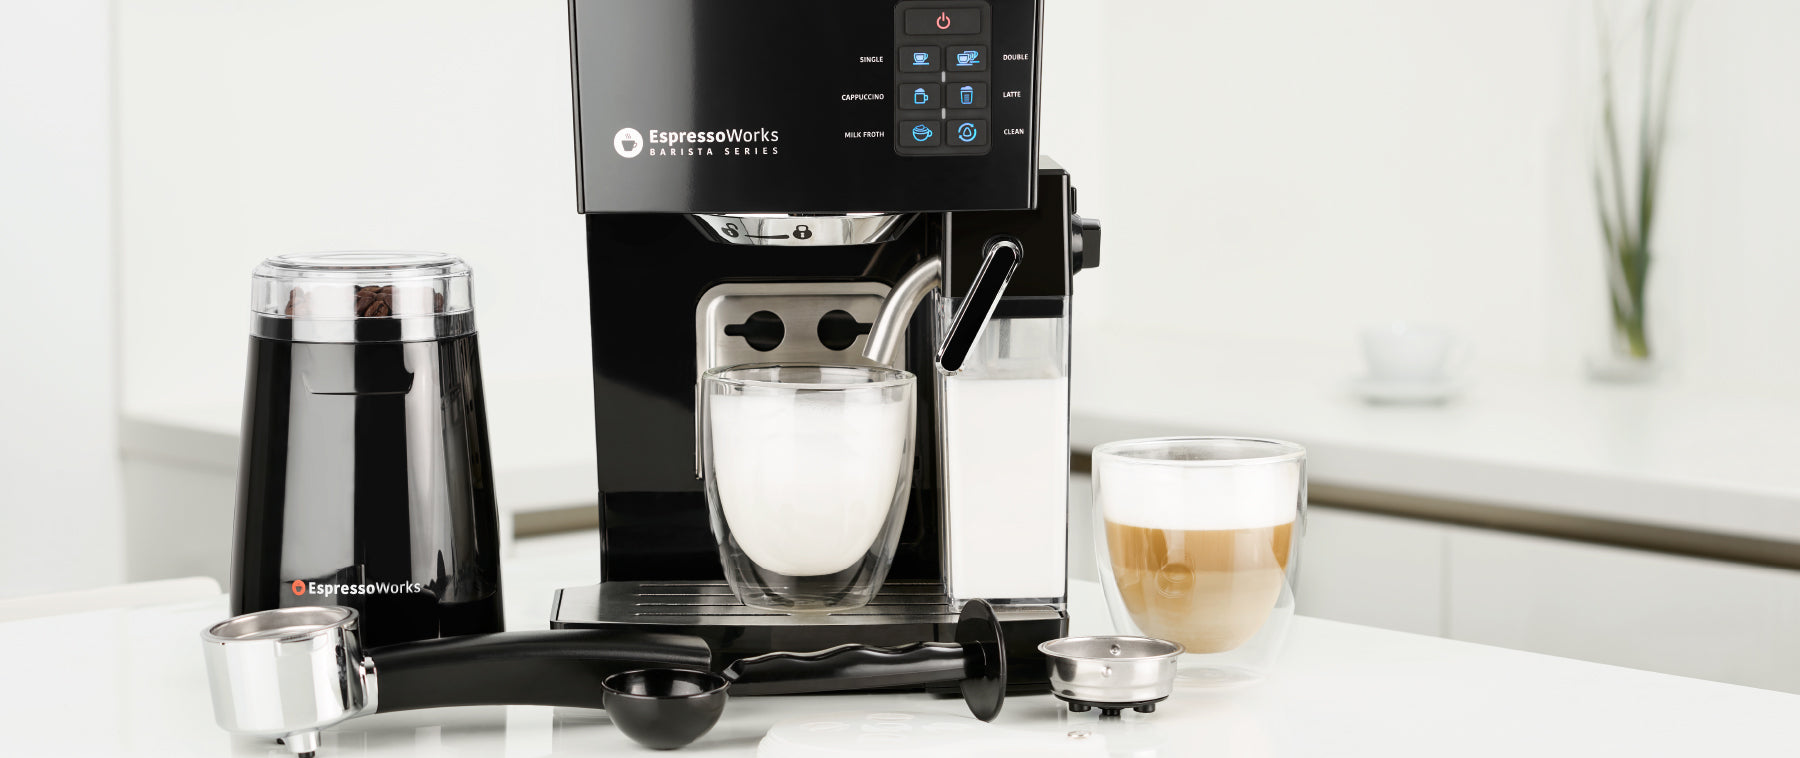 10-Piece Black Espresso & Cappuccino Maker Set - EspressoWorks Holiday Gift Guide for Coffee Lovers